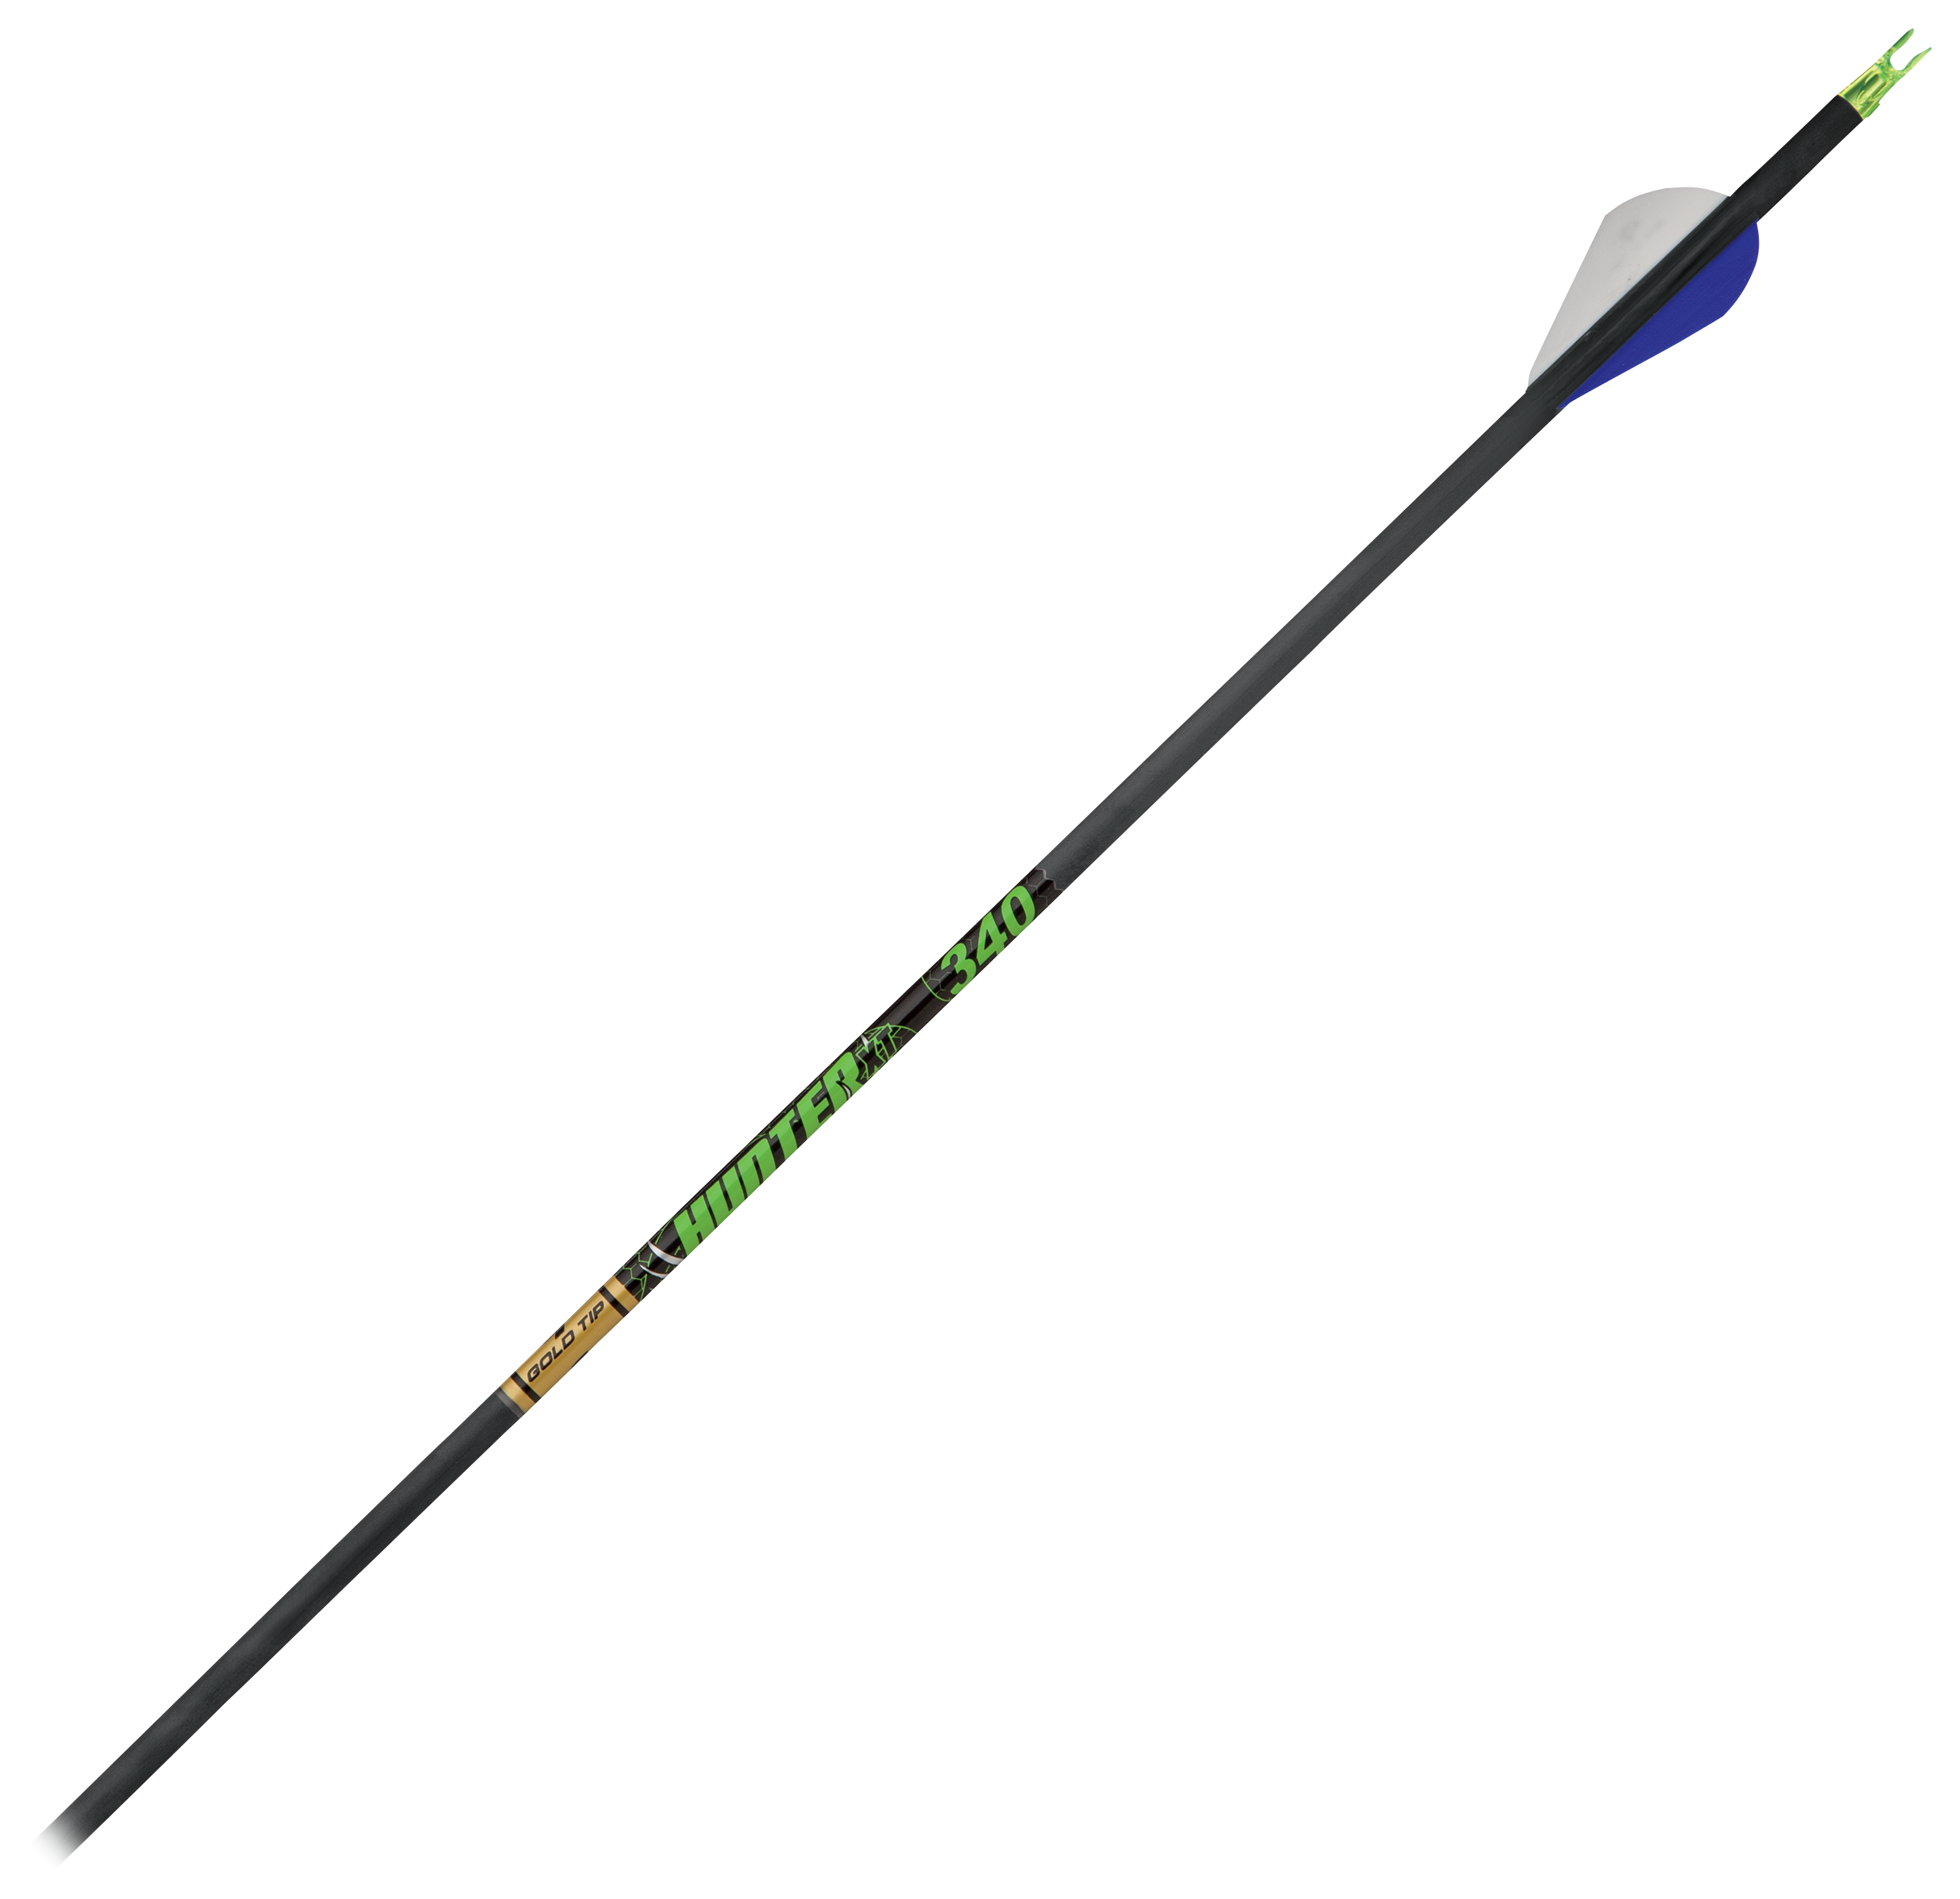 Gold Tip XT Hunter Carbon Hunting Arrows - Size 300